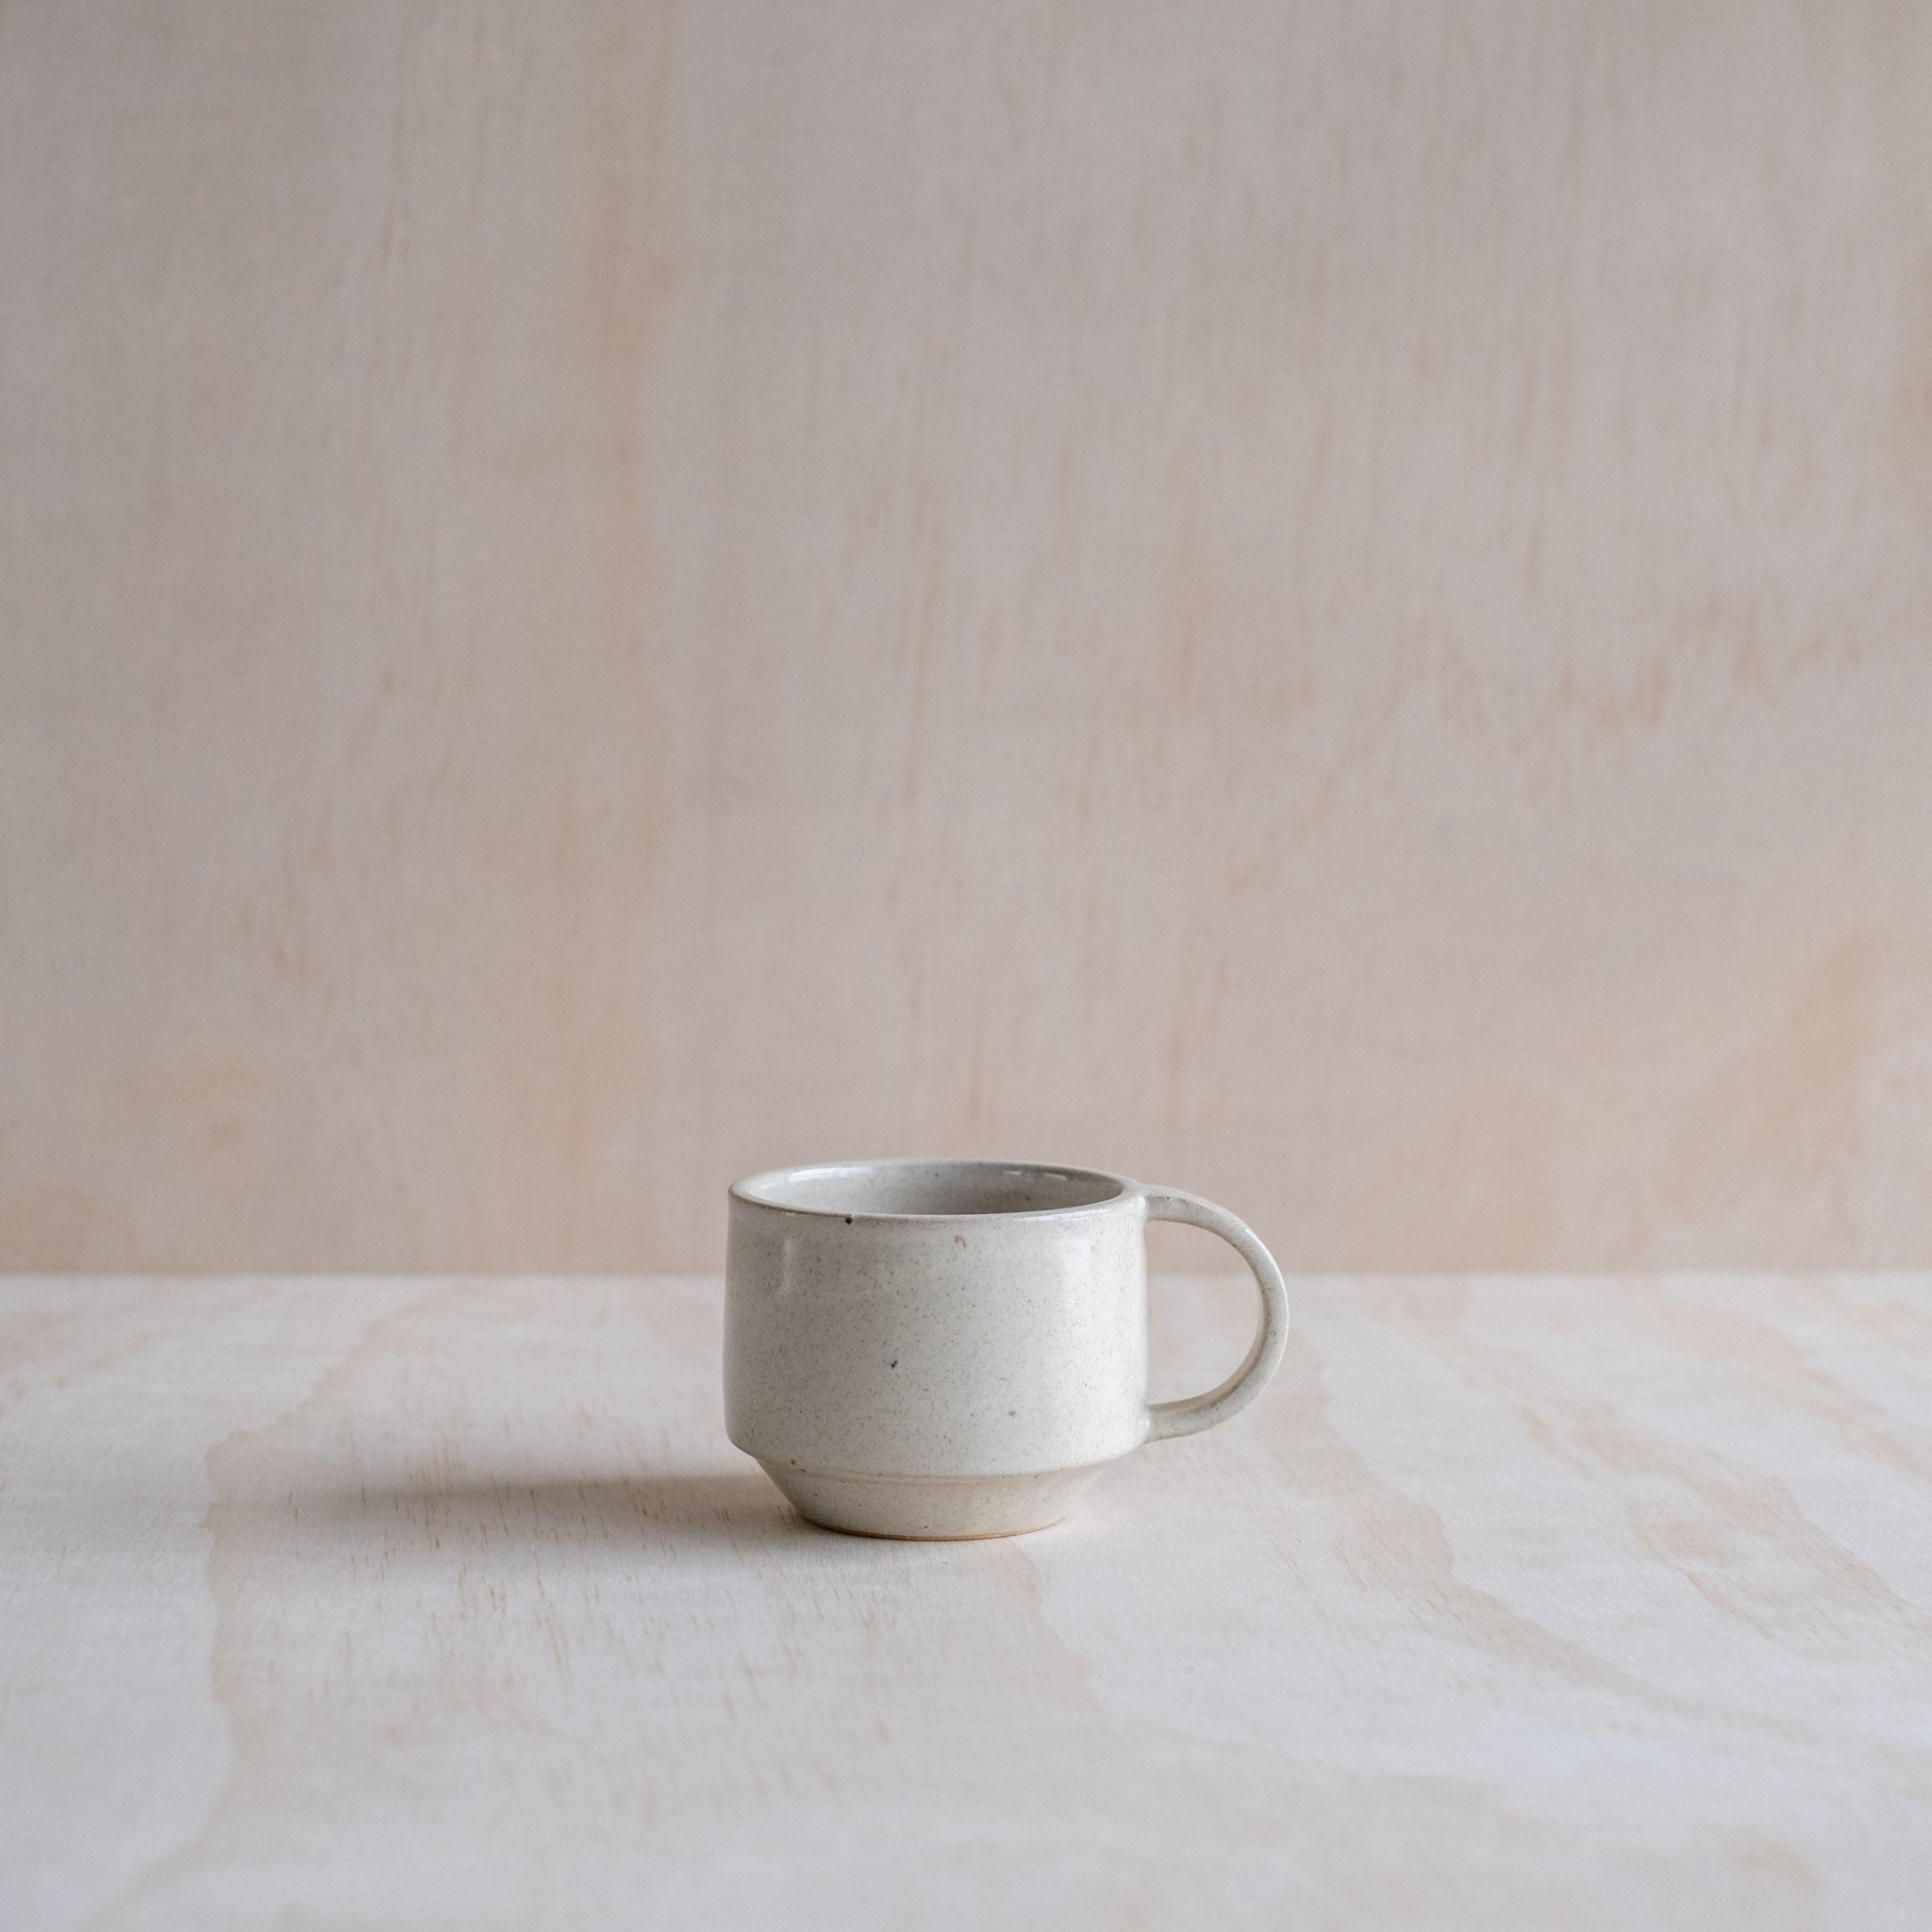 A hand thrown ceramic stacking mug, with beige glaze and "C" shaped handle. Made with an iron-bearing buff clay body that reveals a light speckle.